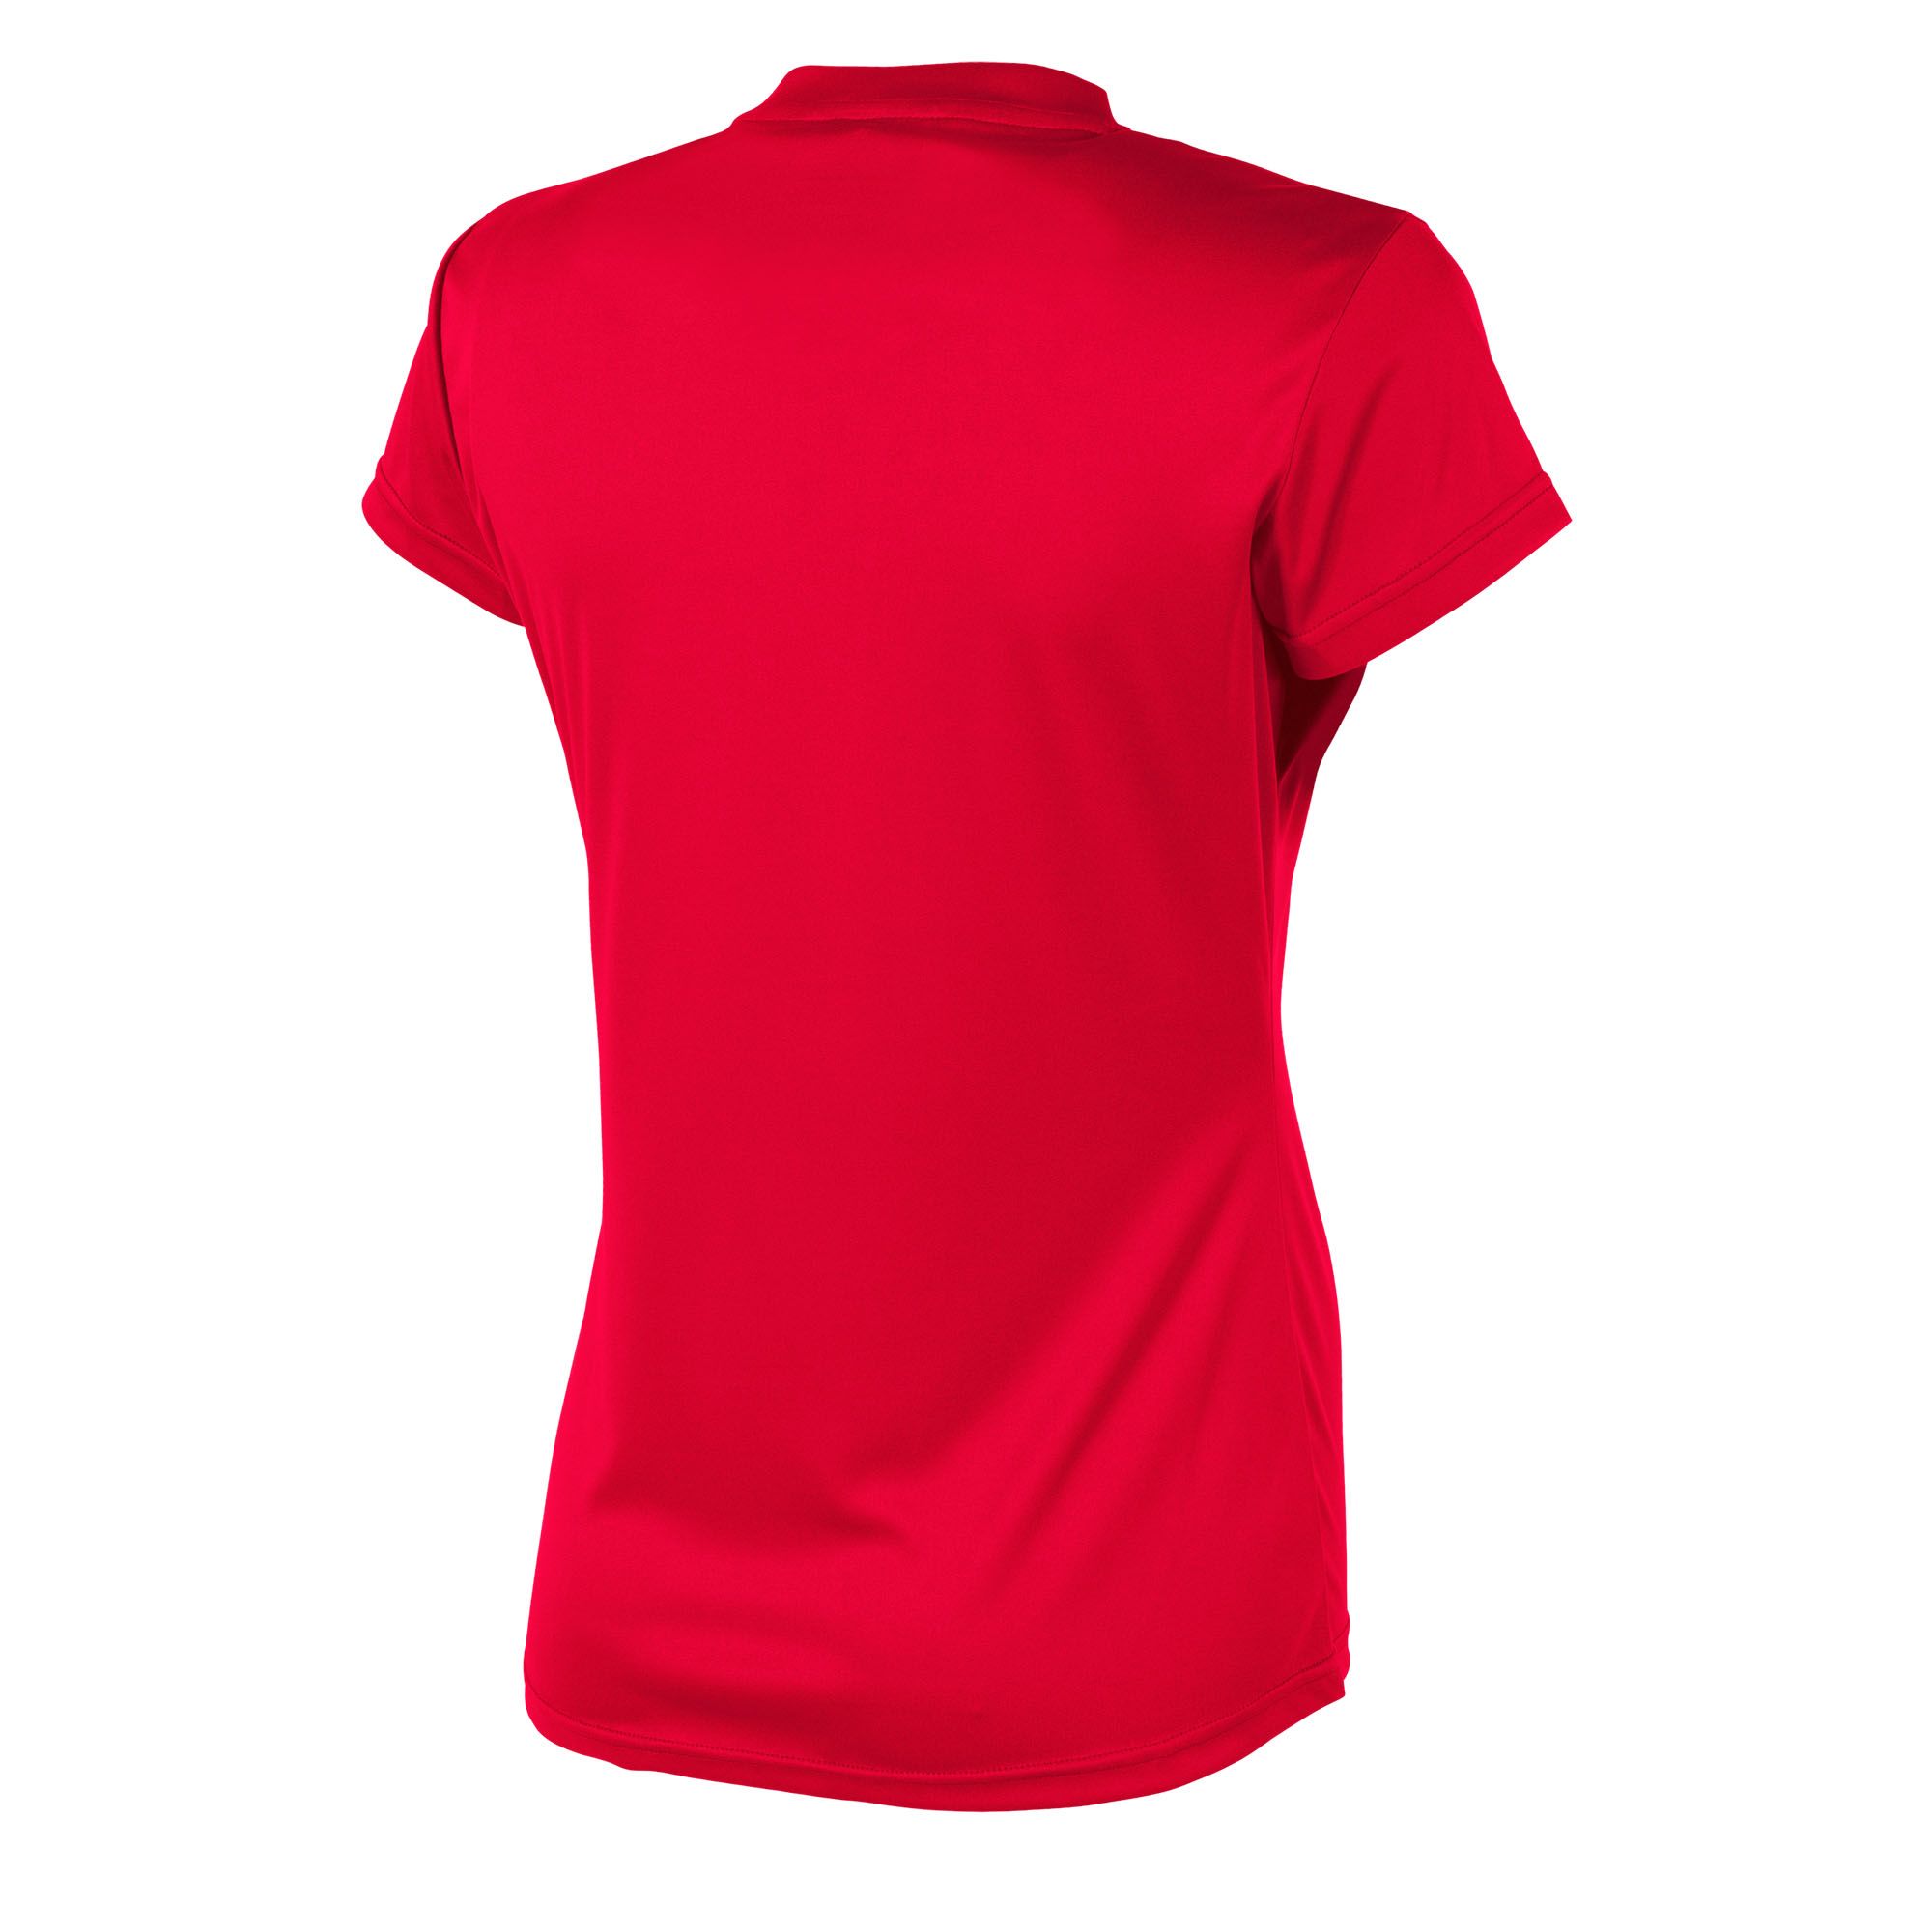 Soccer Jersey / Woman - FIELD - from Stanno